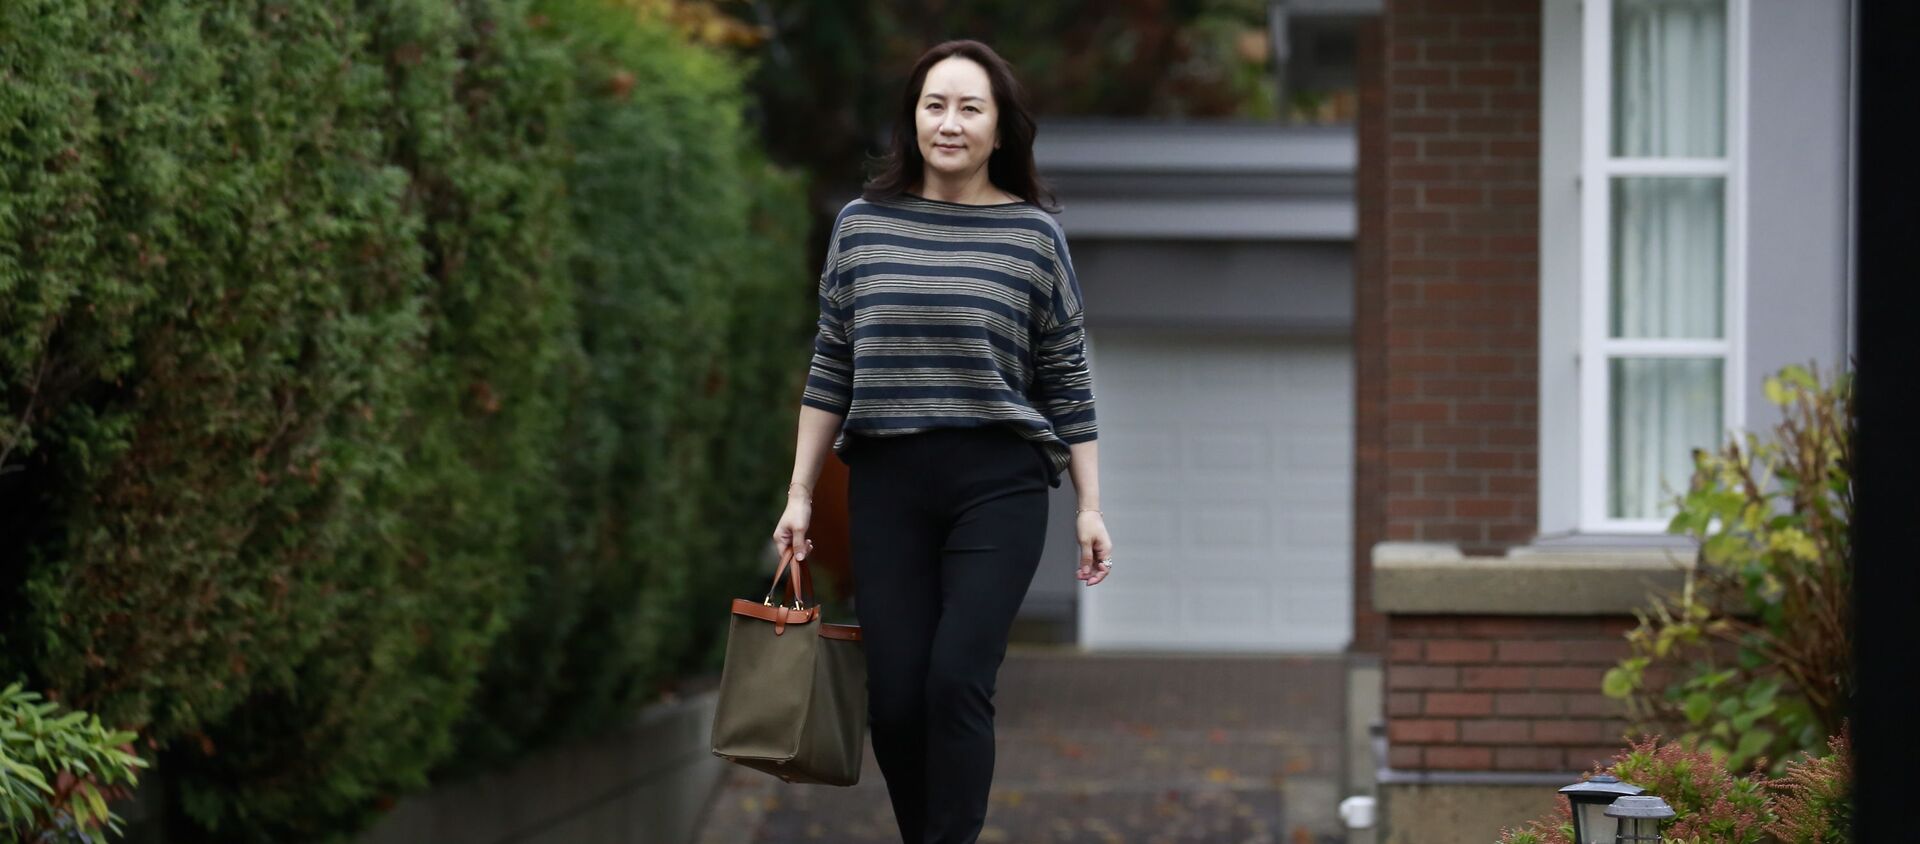 Huawei chief financial officer Meng Wanzhou, monitored at all times under house arrest, heads to a Canadian court to fight an extradition battle to the US after being charged on allegations of banking fraud - Sputnik International, 1920, 01.12.2020